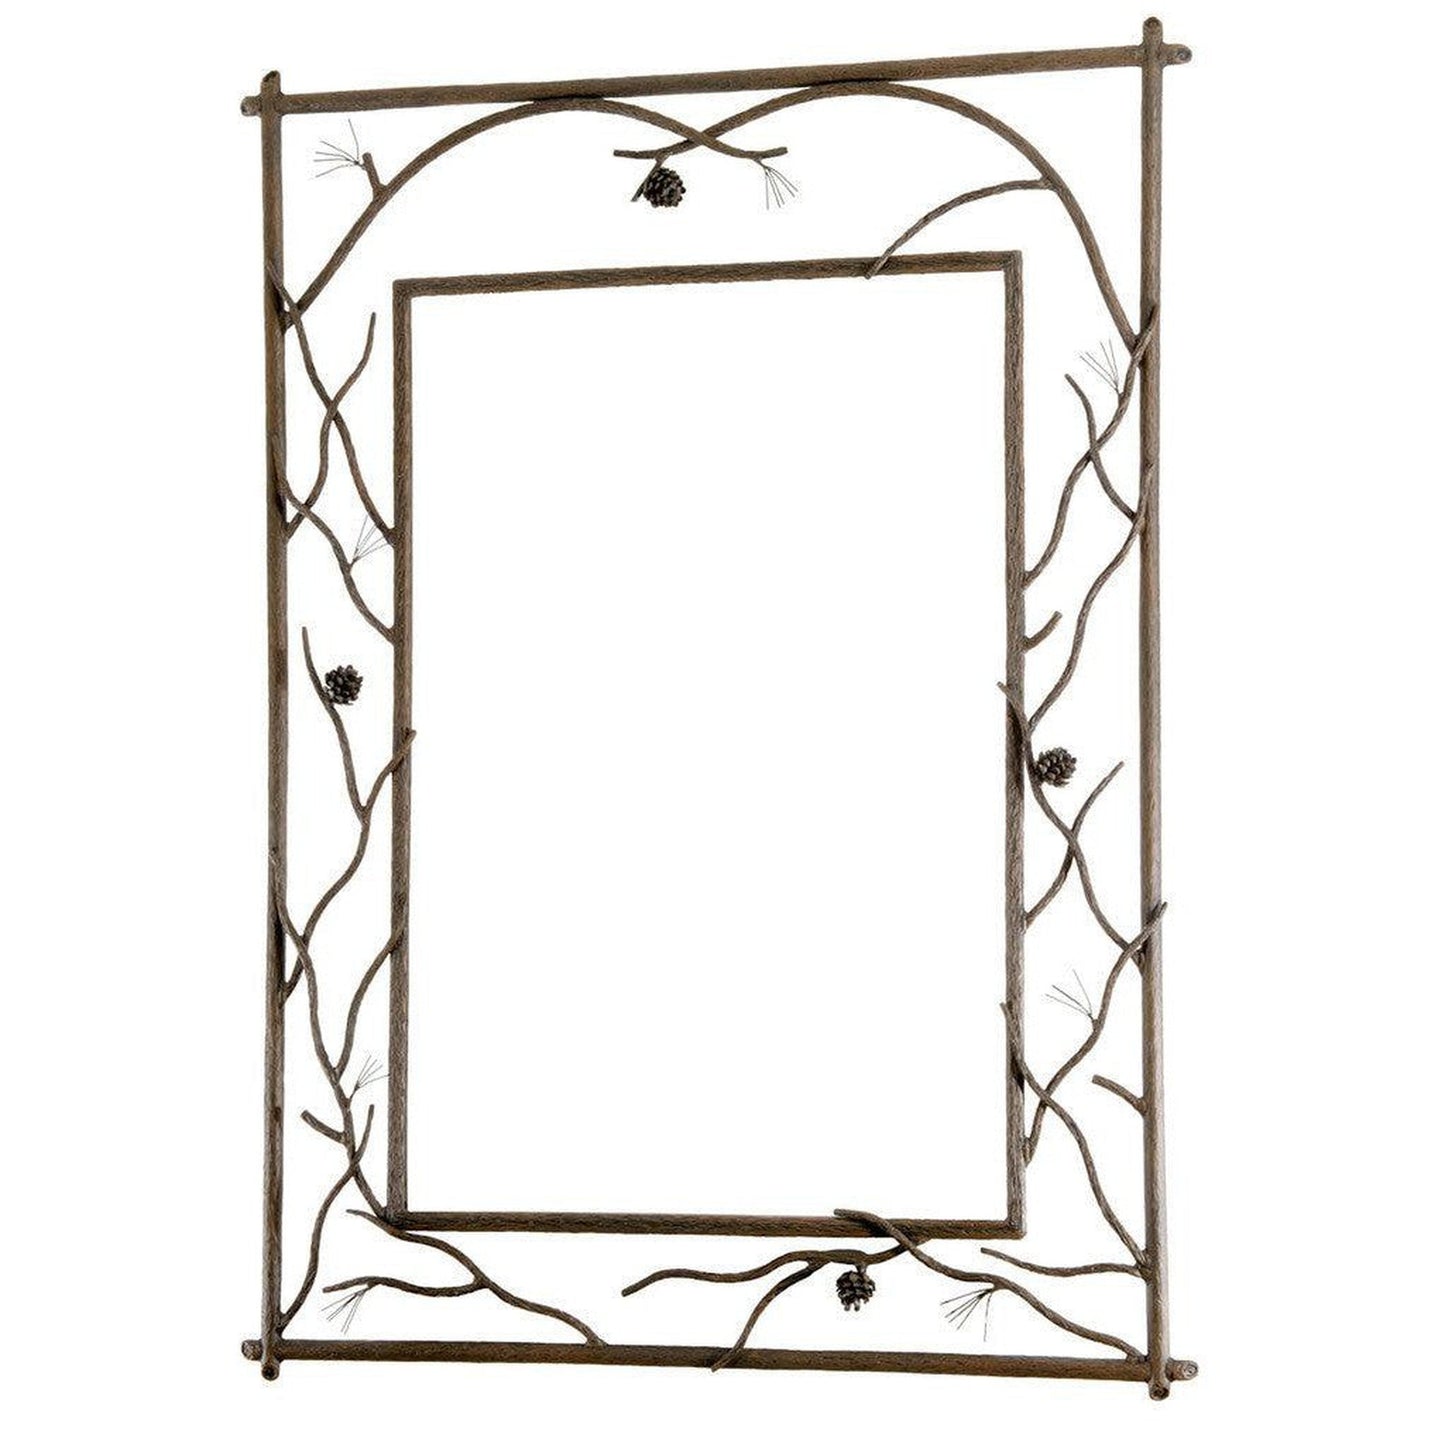 Stone County Ironworks Pine 29" x 35" Small Woodland Brown Branched Iron Wall Mirror With Pewter Iron Accent